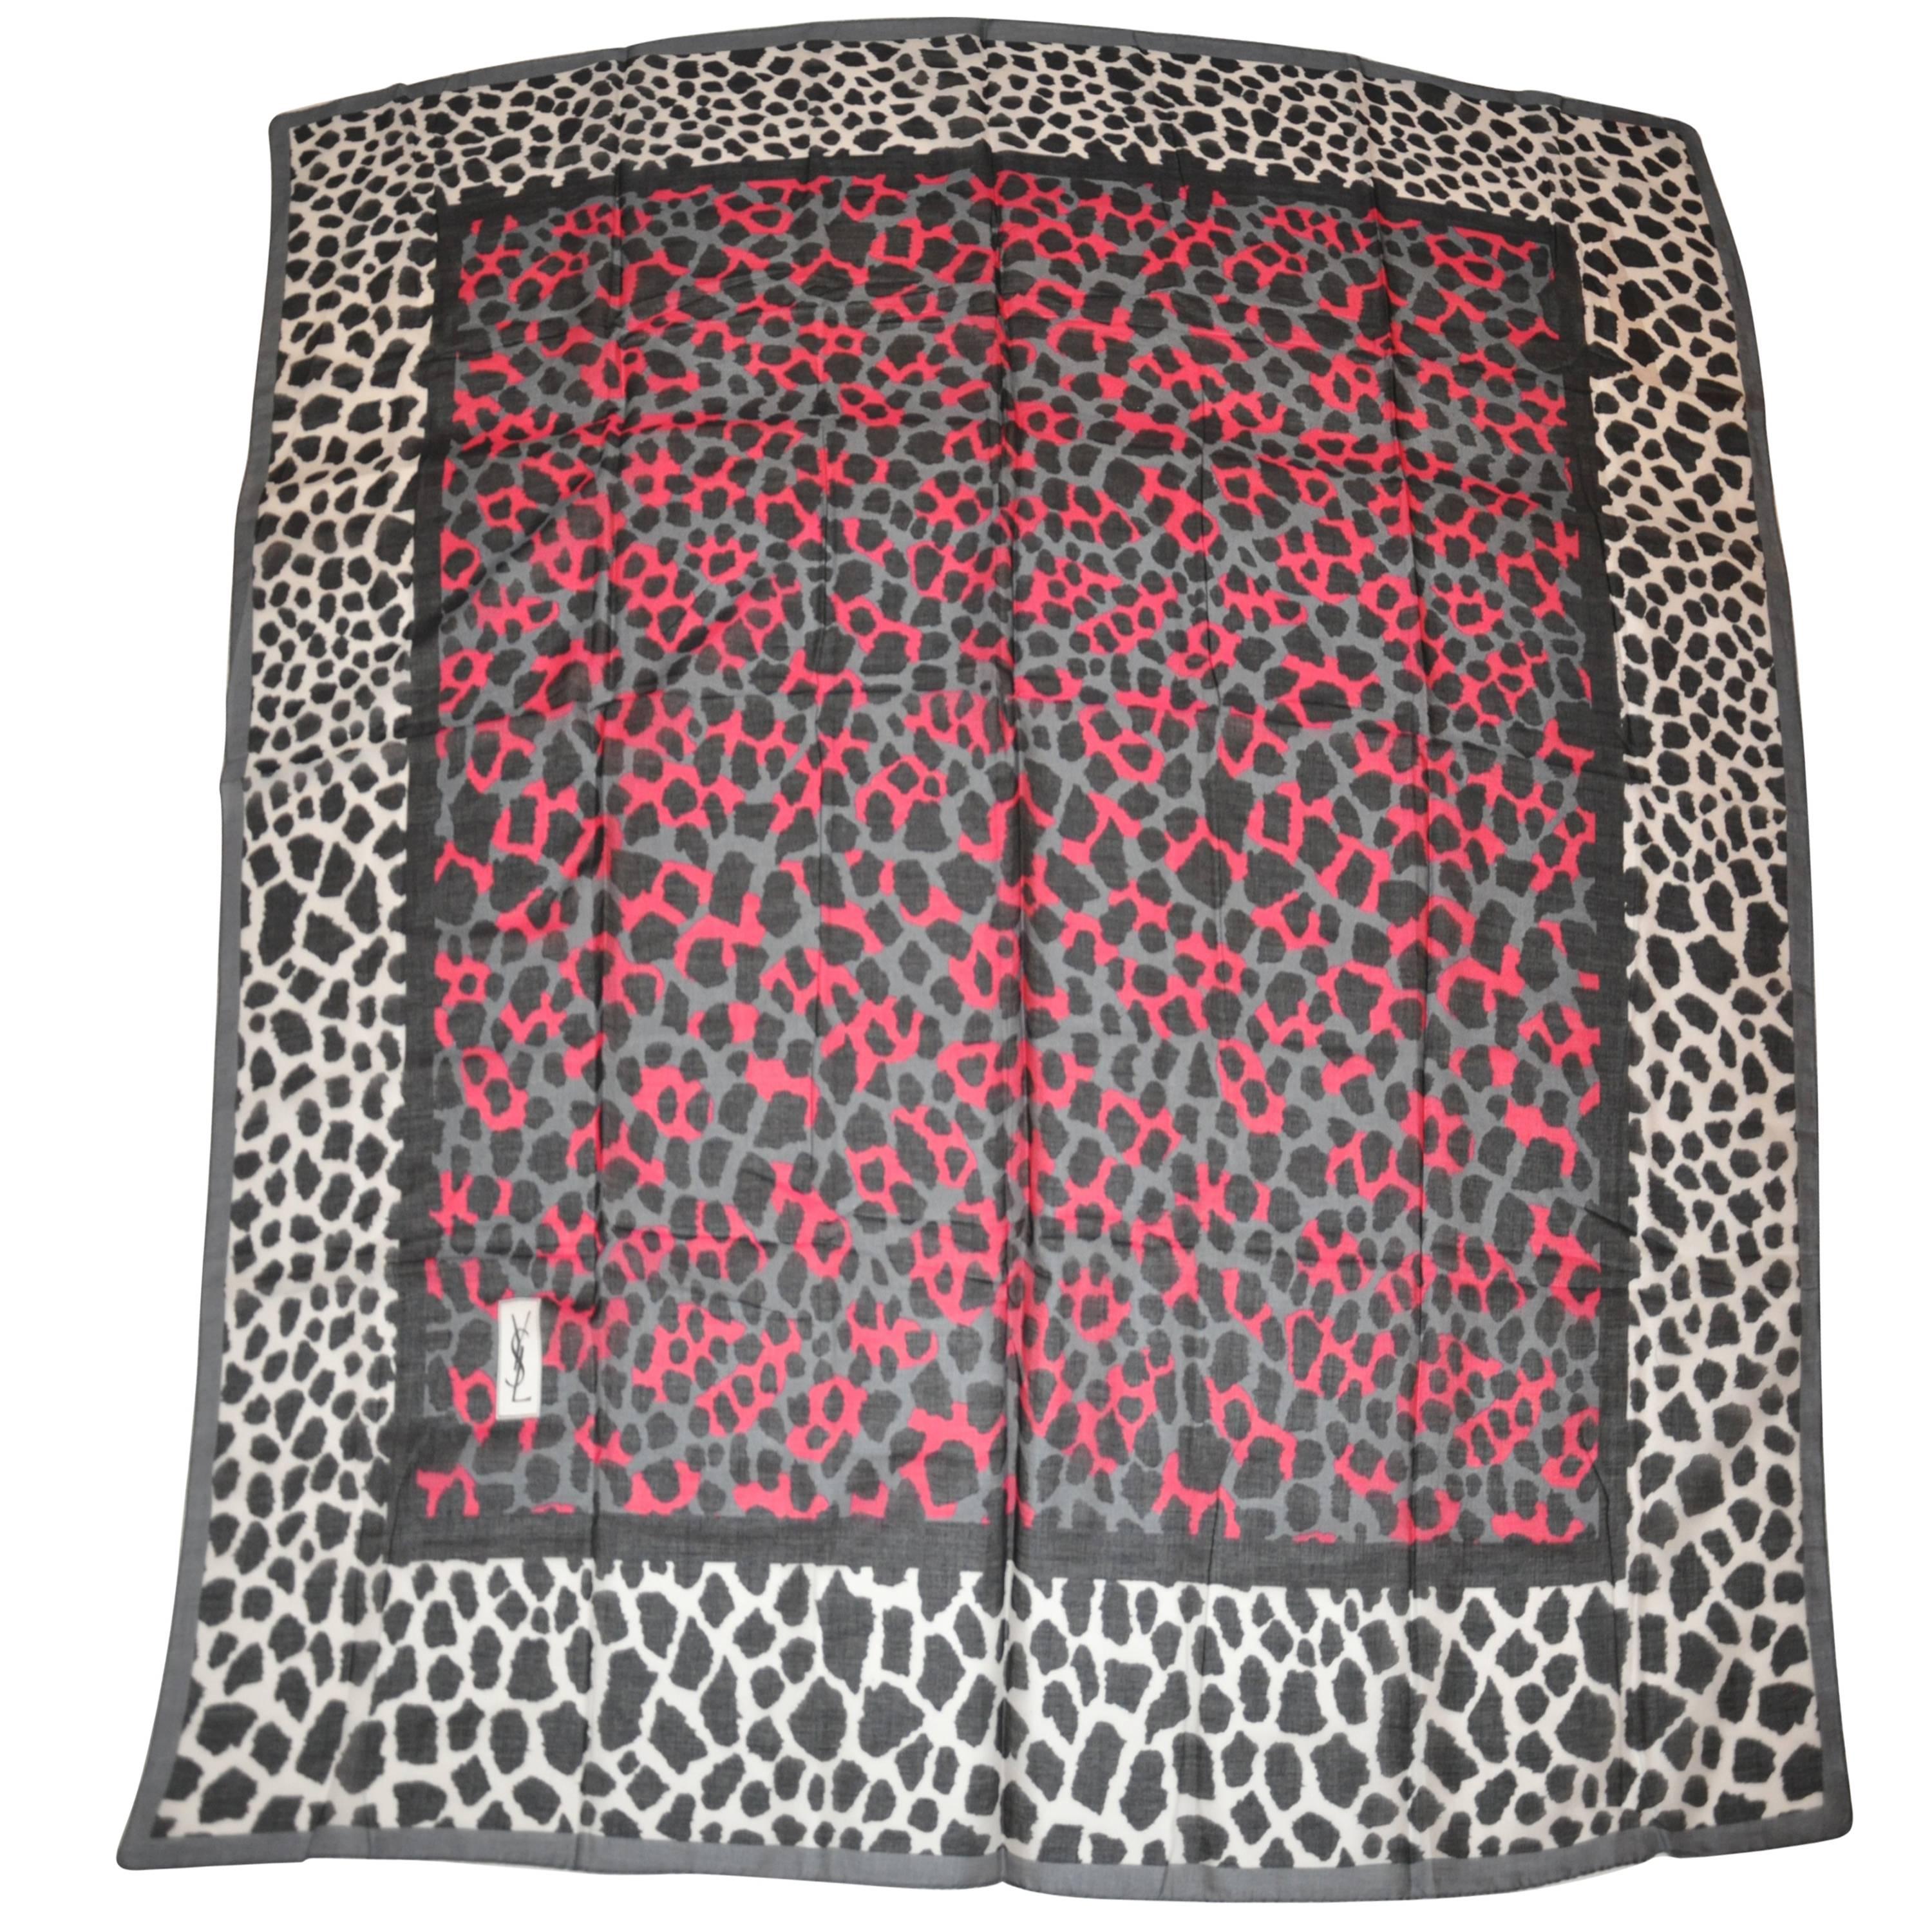 Yves Saint Laurent Huge Cotton Multi-Leopard with Gray Border Scarf For Sale